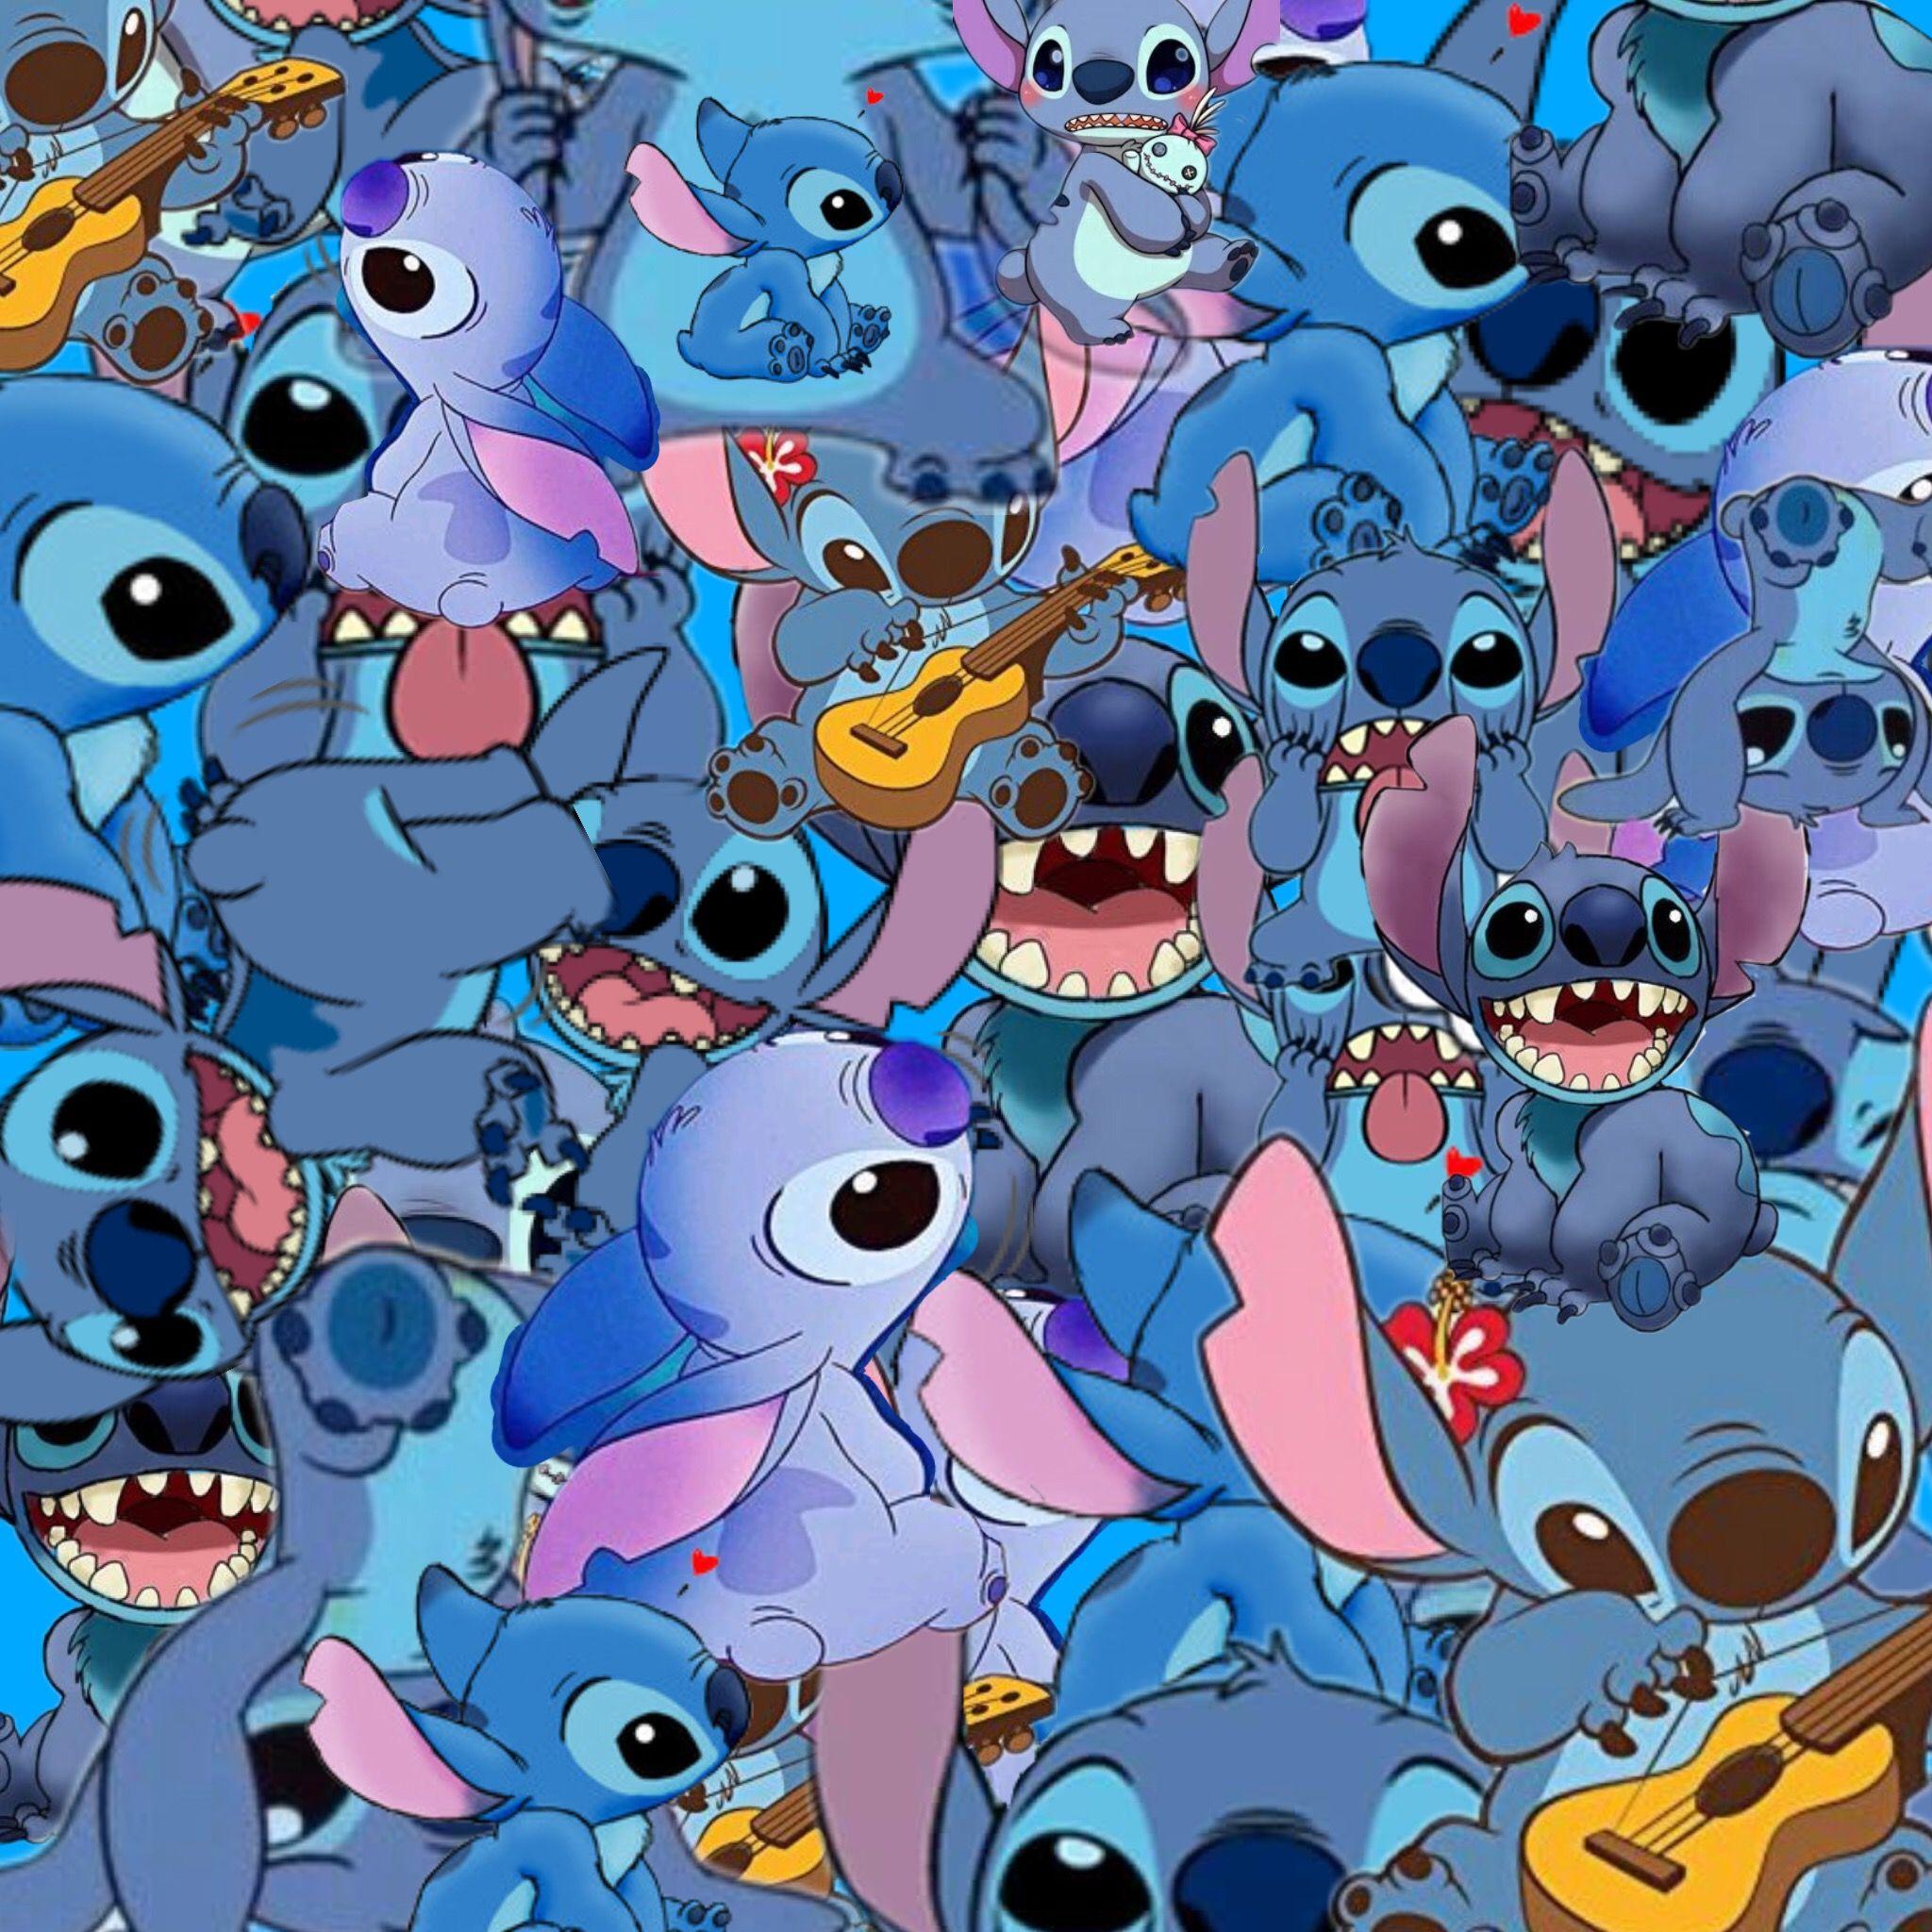 Stitch Collage Wallpapers - Top Free Stitch Collage Backgrounds